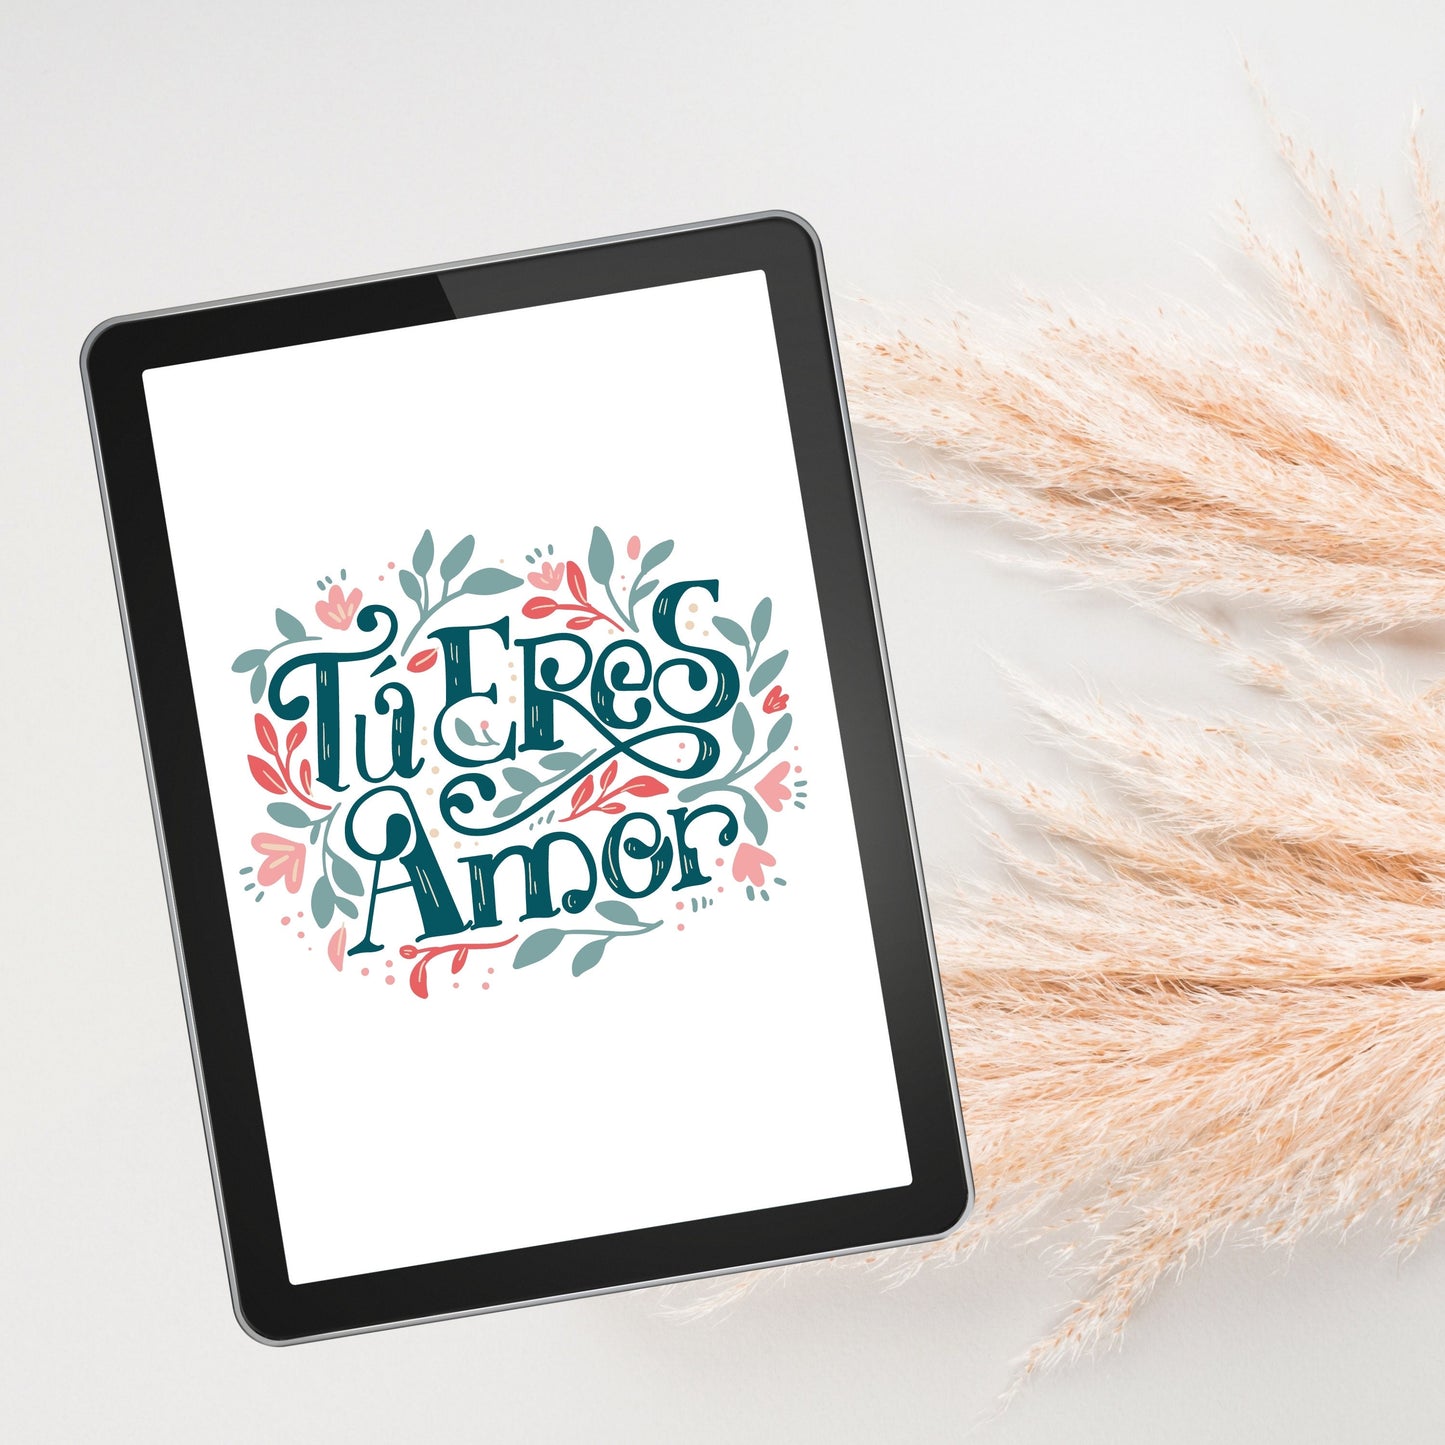 795 Calligraphy Bundle for Procreate